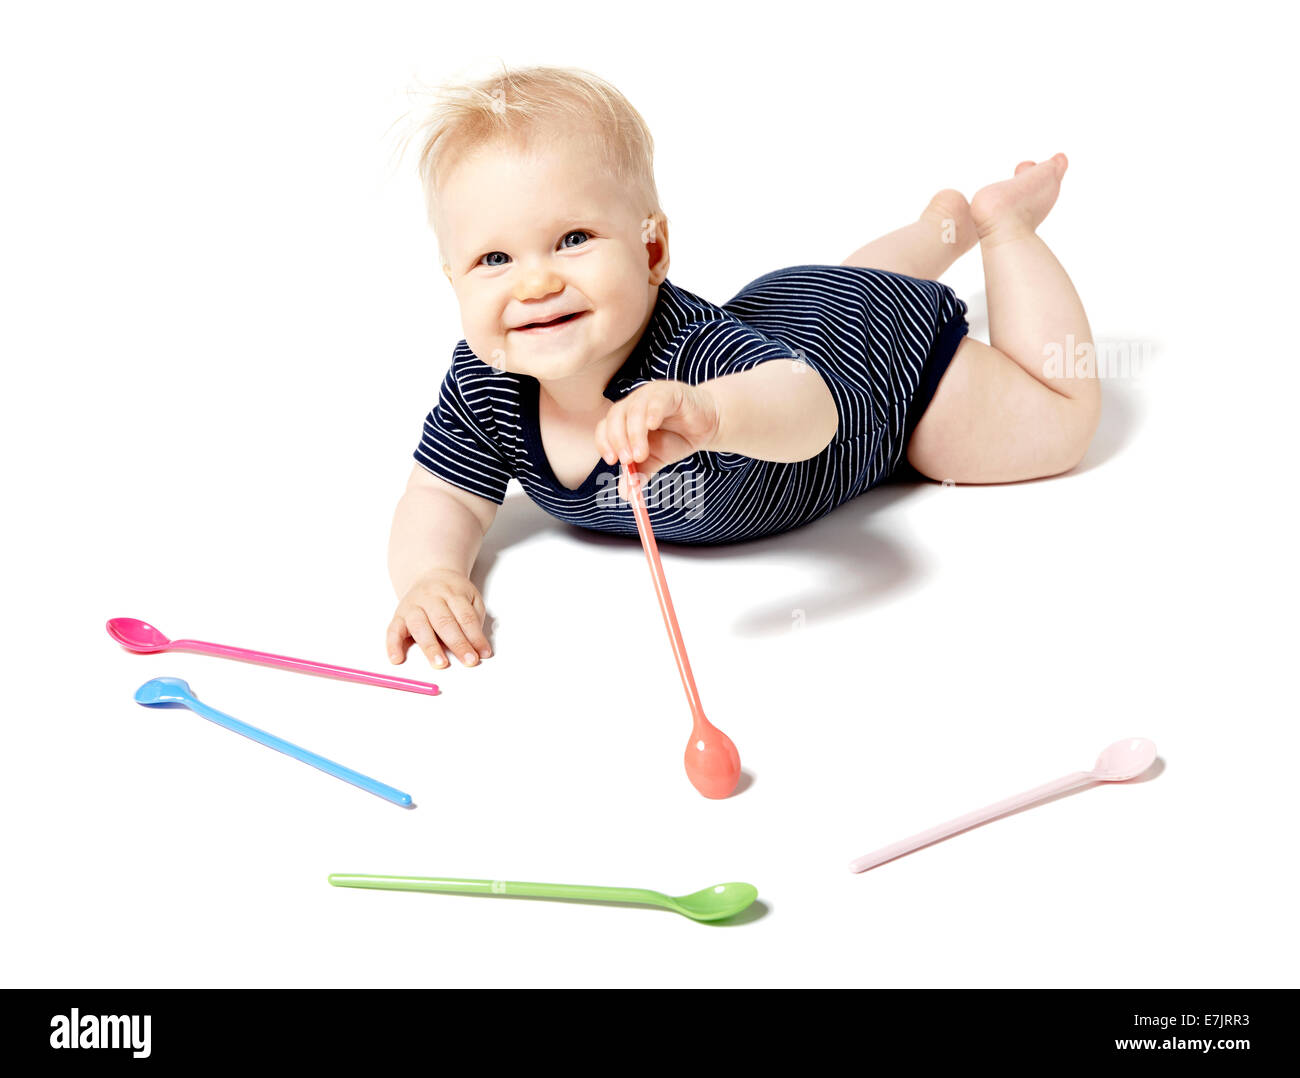 Seven months old baby picking spoons. Isolated on white background. Stock Photo